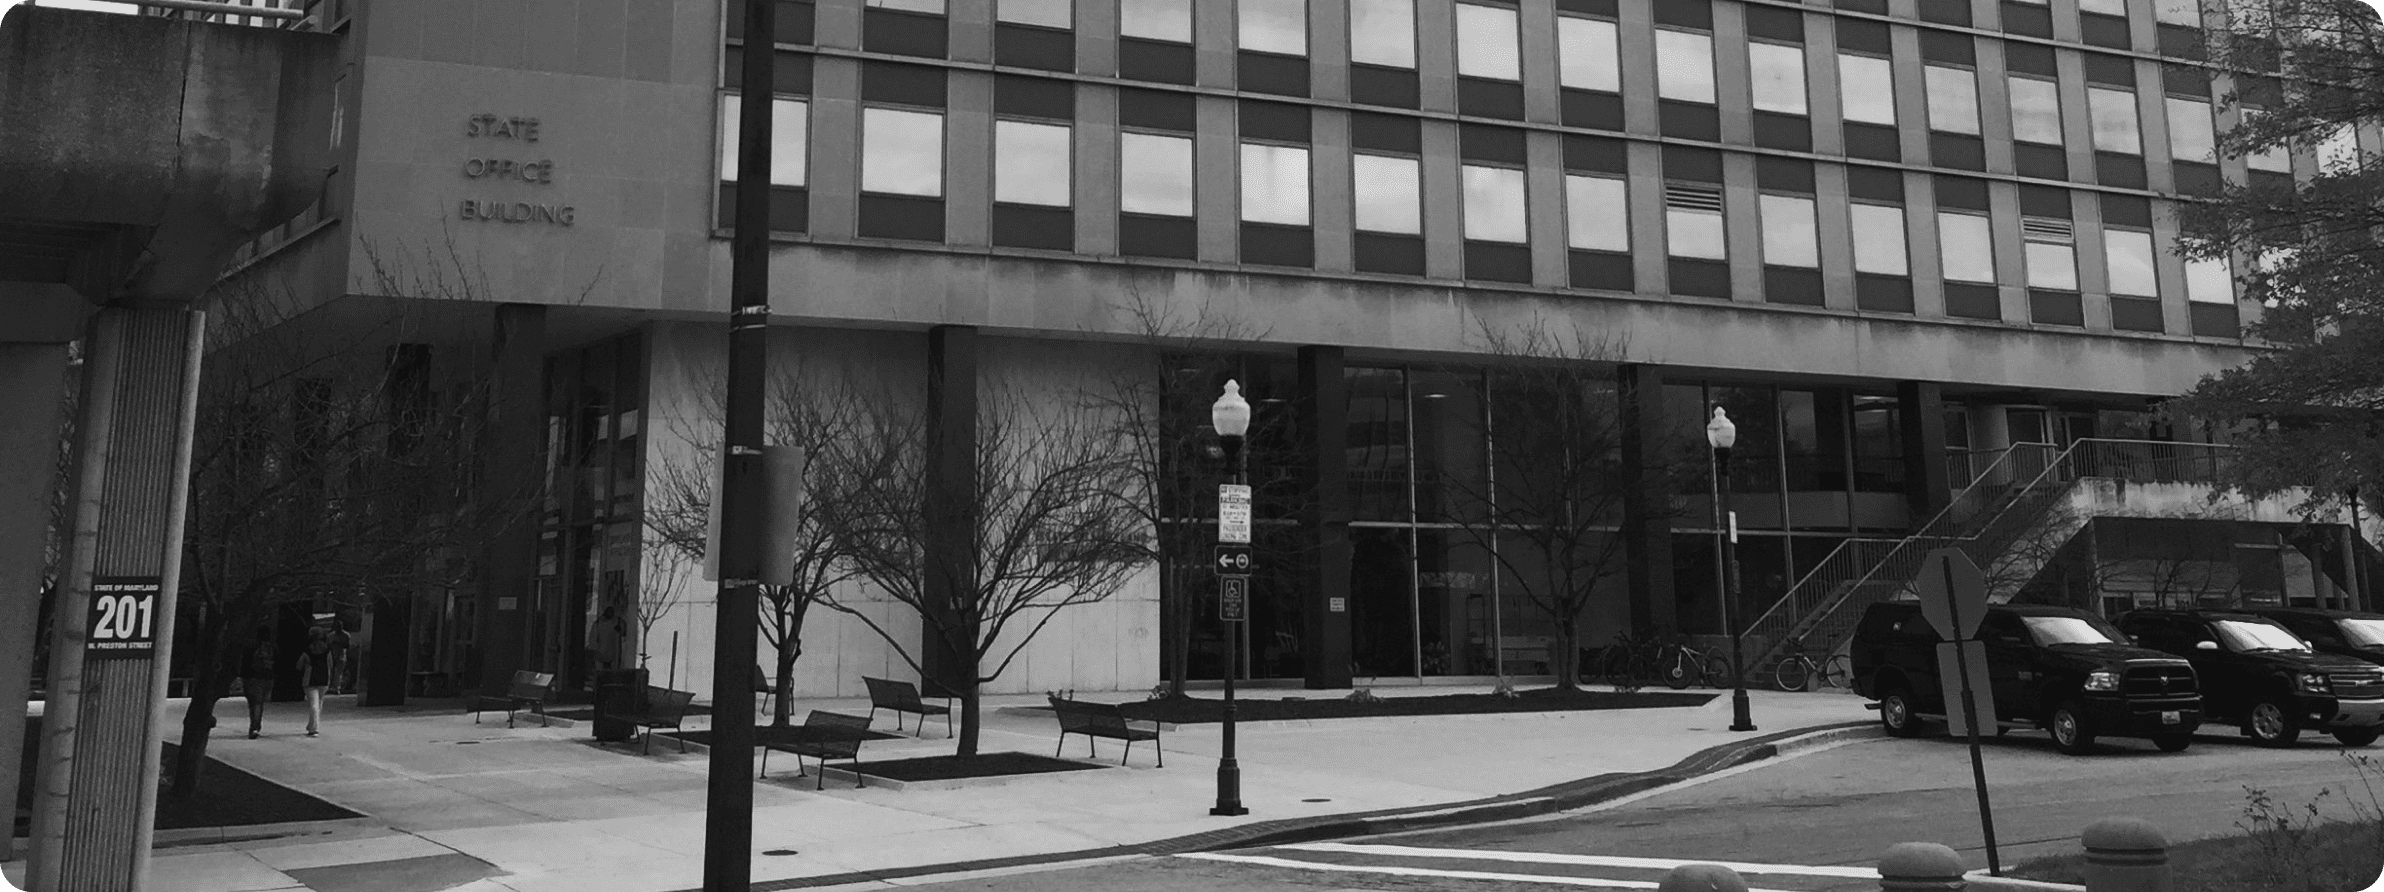 Corporate & Business Law - Patent and Trademark Office HQ, Alexandria, VA